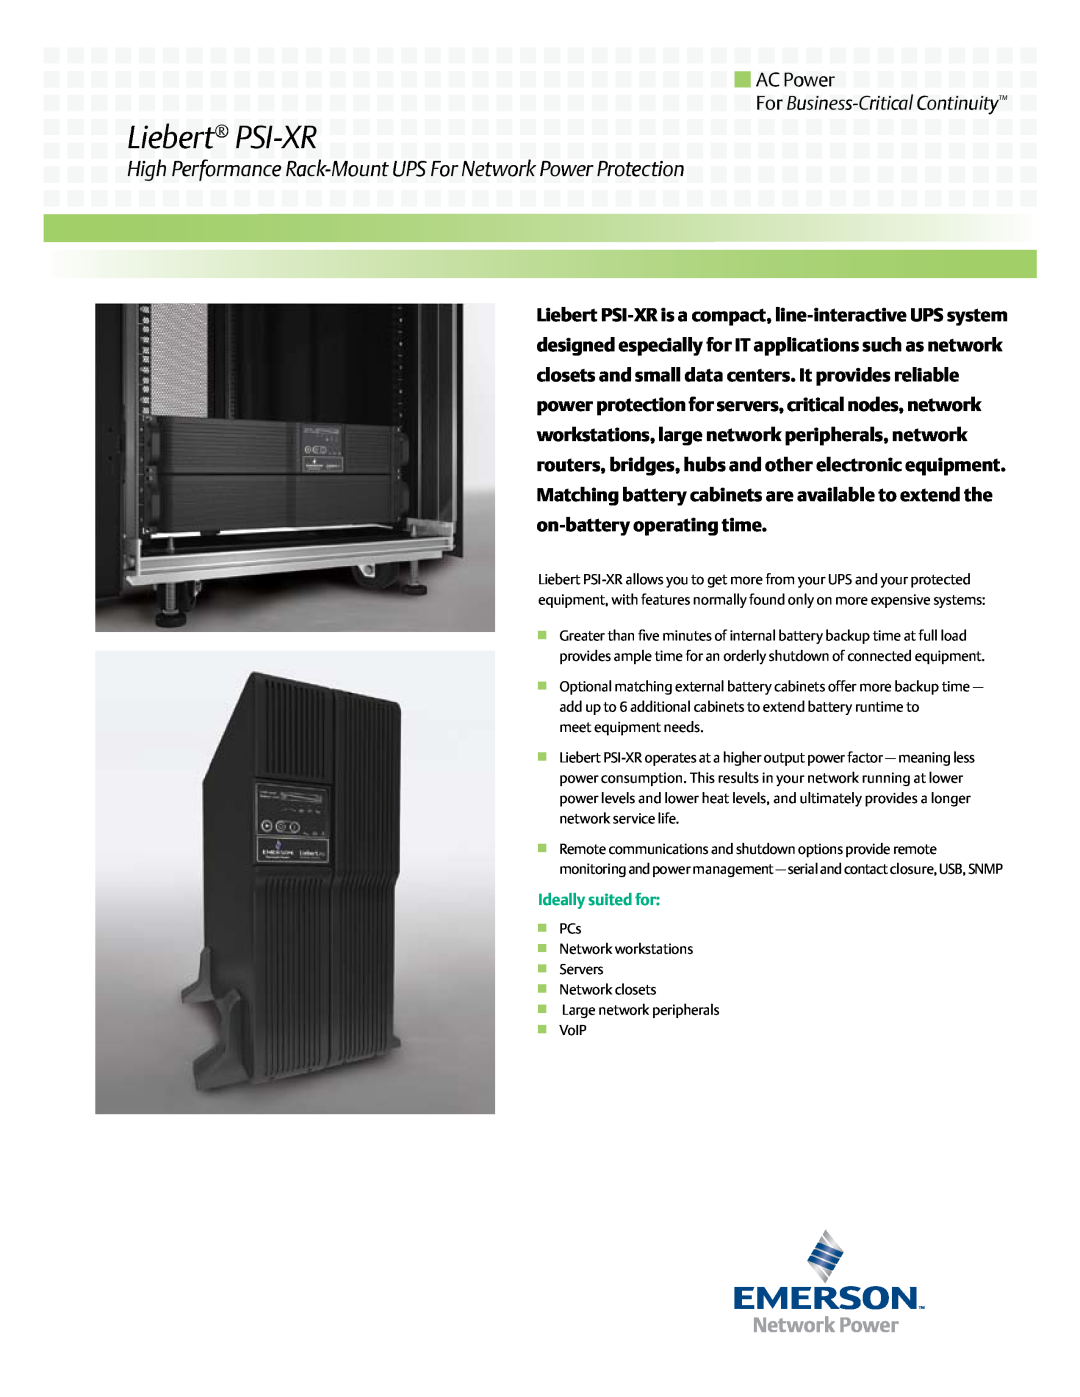 Emerson manual Ideally suited for, Liebert PSI-XR, AC Power, For Business-CriticalContinuity 